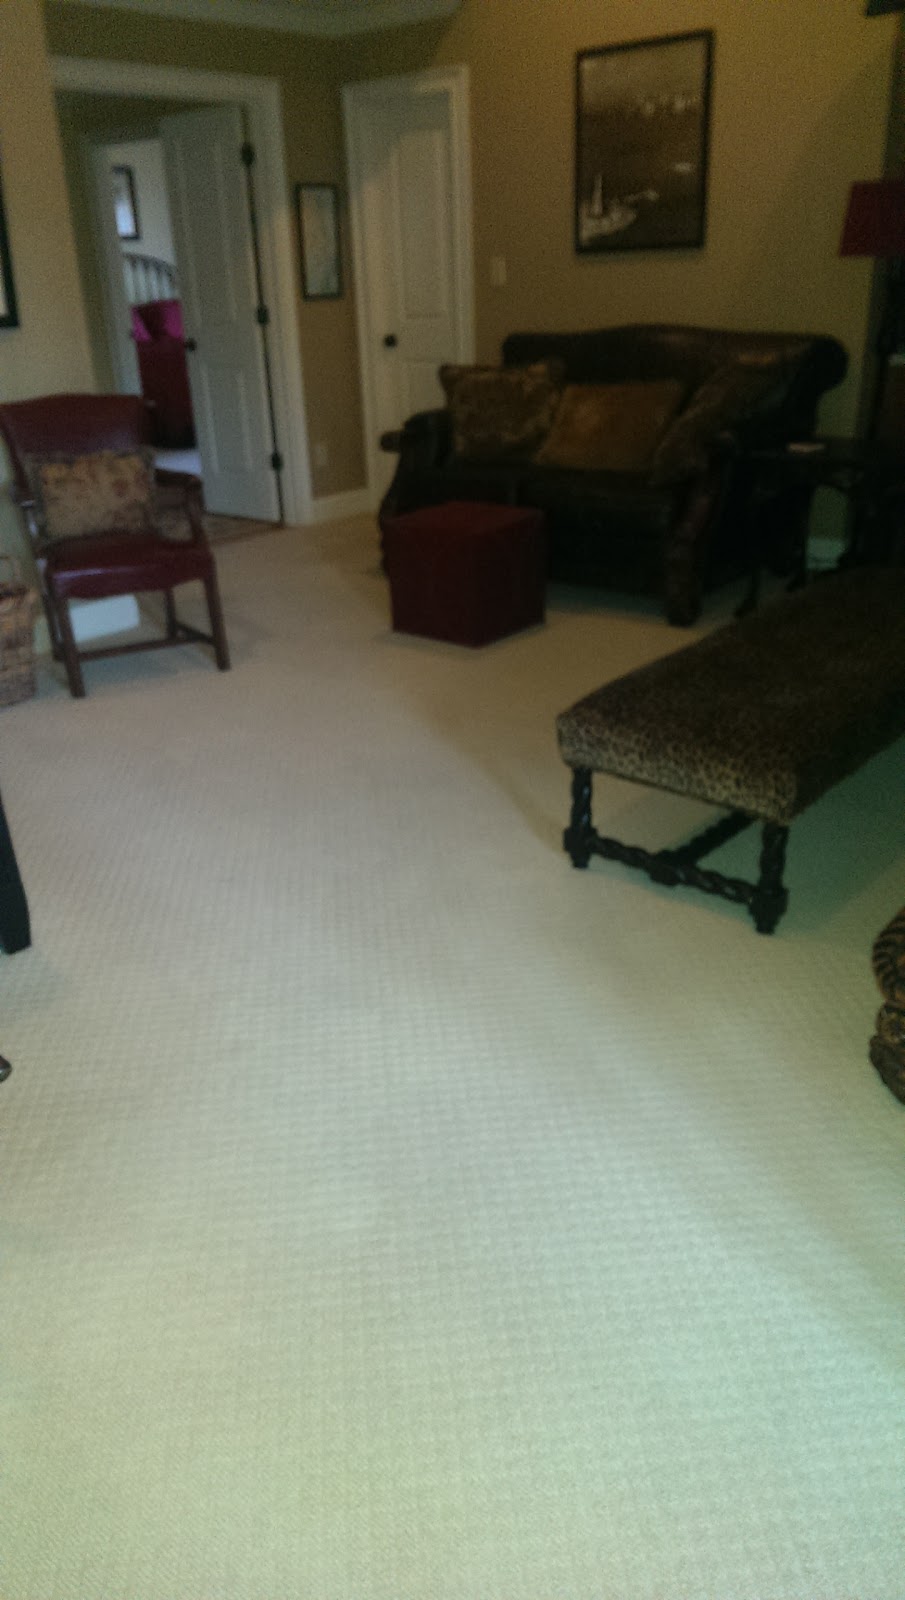 Chem-Dry Carpet Specialist | 4909 Waters Edge Dr Suite 110, Raleigh, NC 27606, USA | Phone: (919) 859-1940